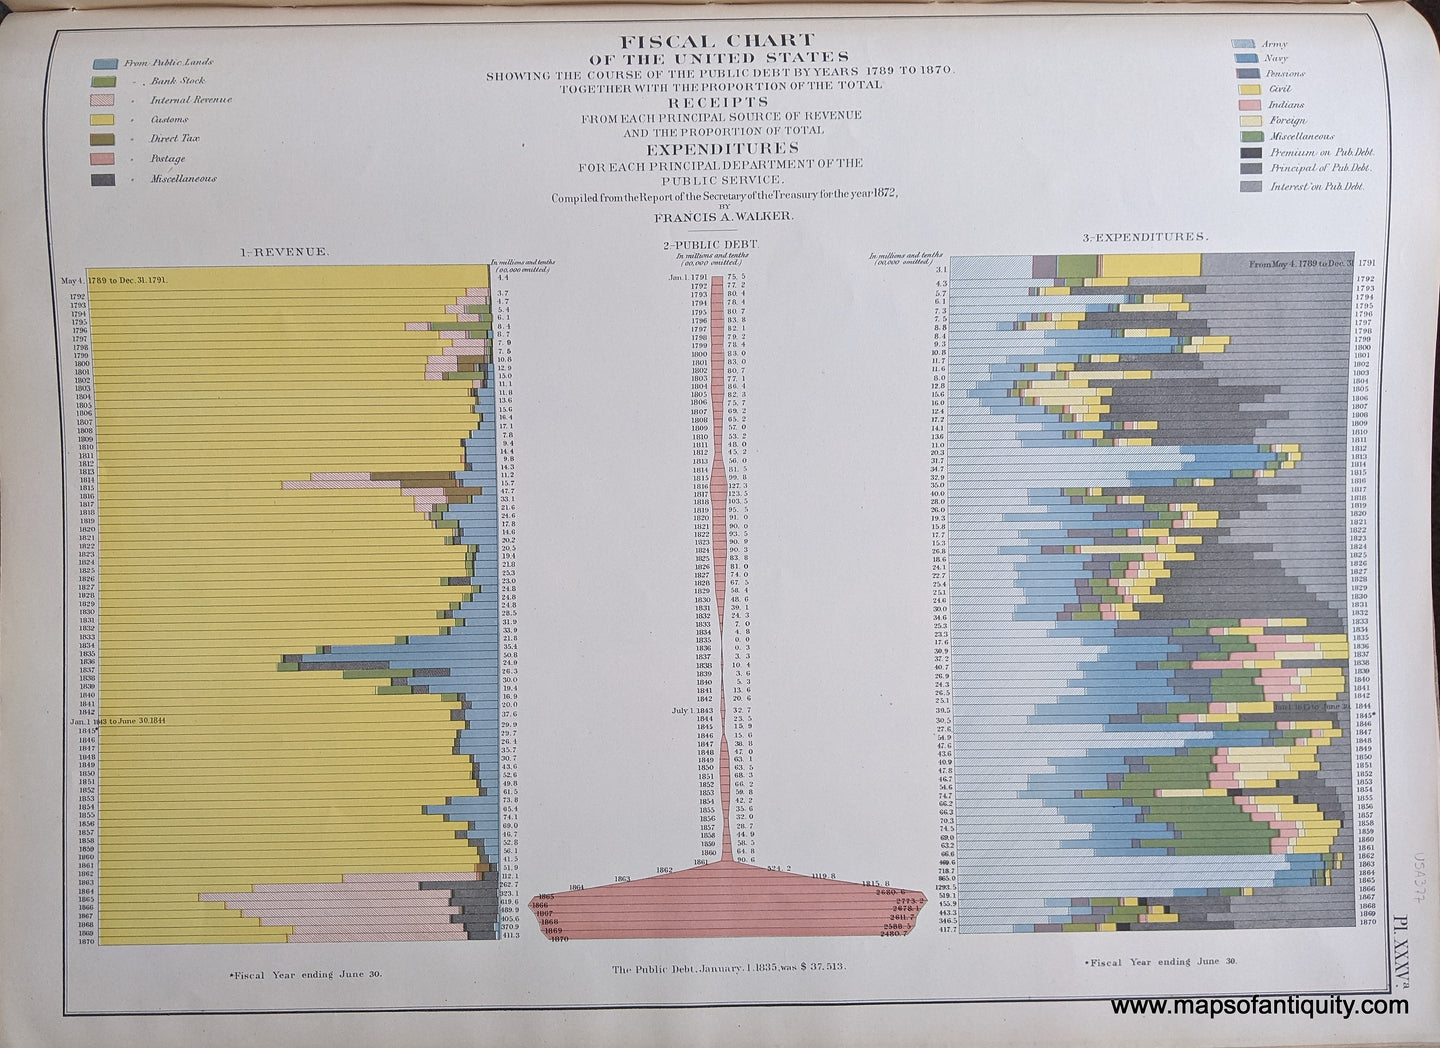 Genuine-Antique-Map-Fiscal-Chart-of-the-United-States-Showing-the-Course-of-the-Public-Debt-by-Years-1789-to-1870.-Together-with-the-Proportion-of-the-Total-Receipts-from-each-Principal-Source-of-Revenue-and-the-Proportion-of-Total-Expenditures-for-each-Principal-Department-of-the-Public-Service.-United-States--1874-Walker-/-Bien-Maps-Of-Antiquity-1800s-19th-century